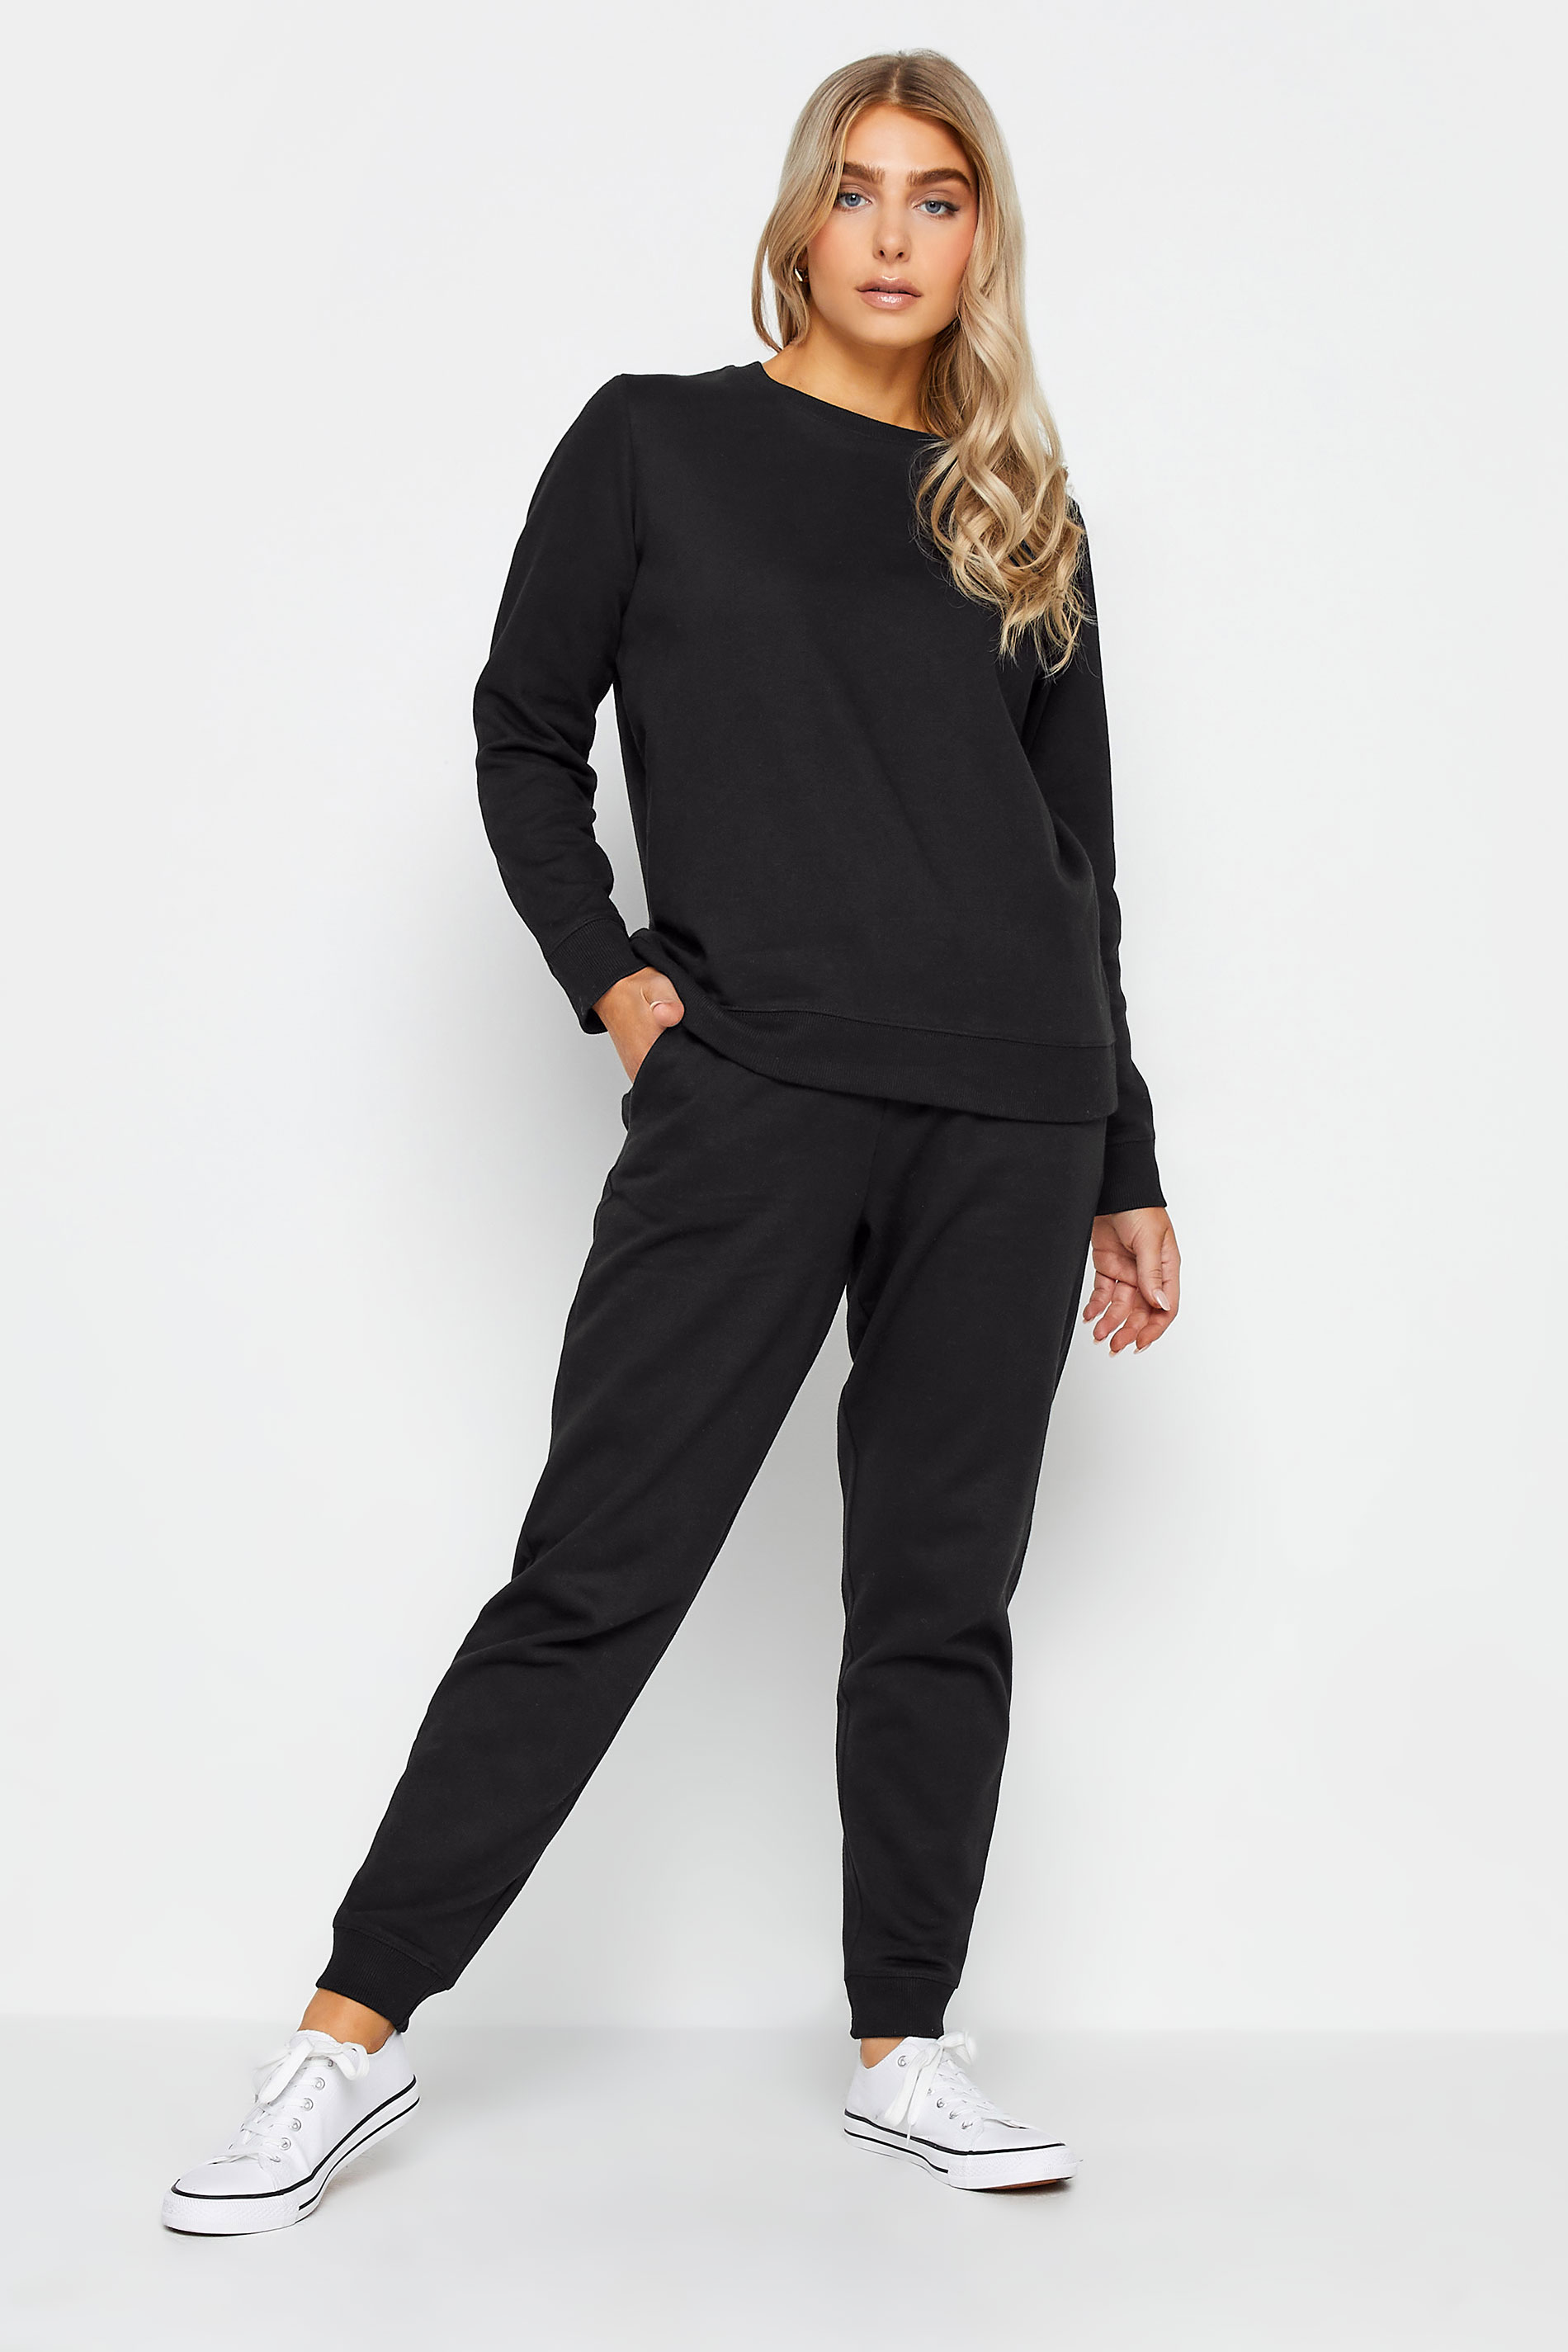 M&Co Black Essential Soft Touch Lounge Joggers | M&Co